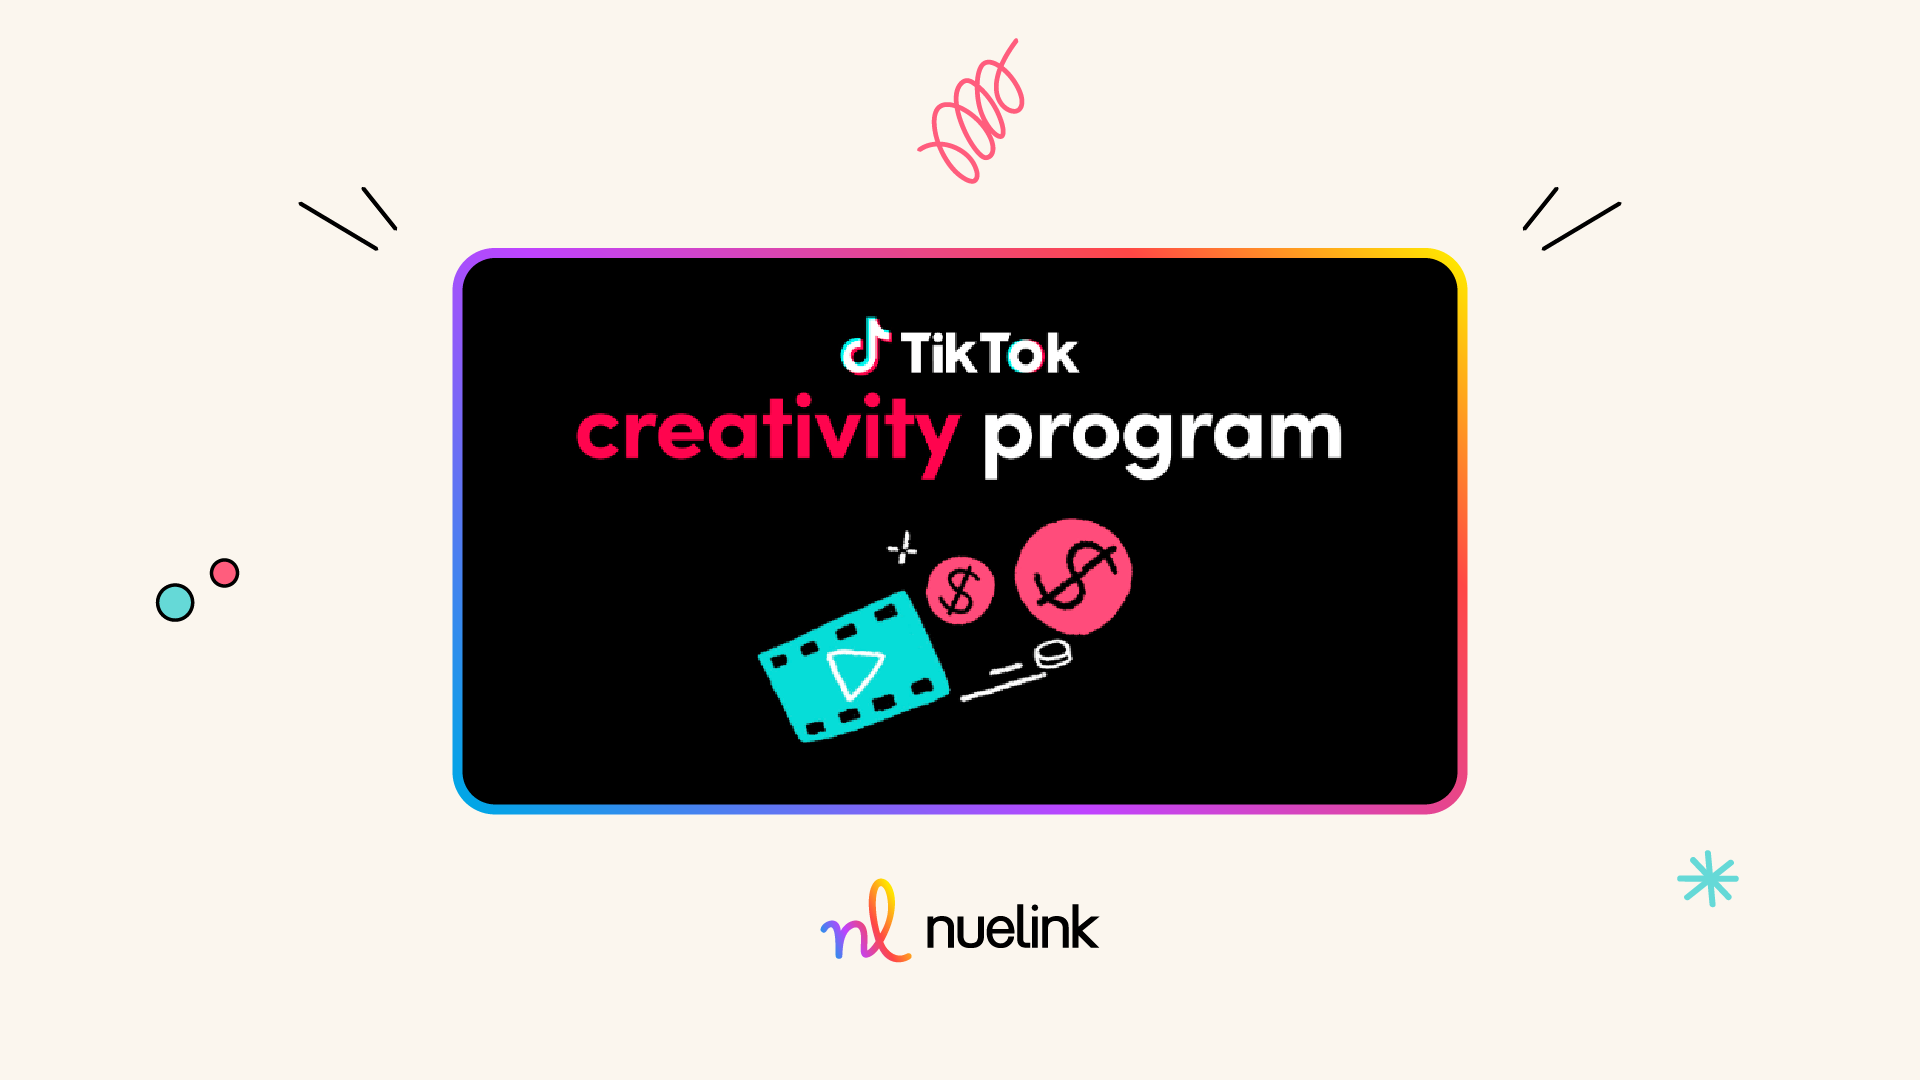 TikTok's New Creativity Program Takes a Page out of 's Book